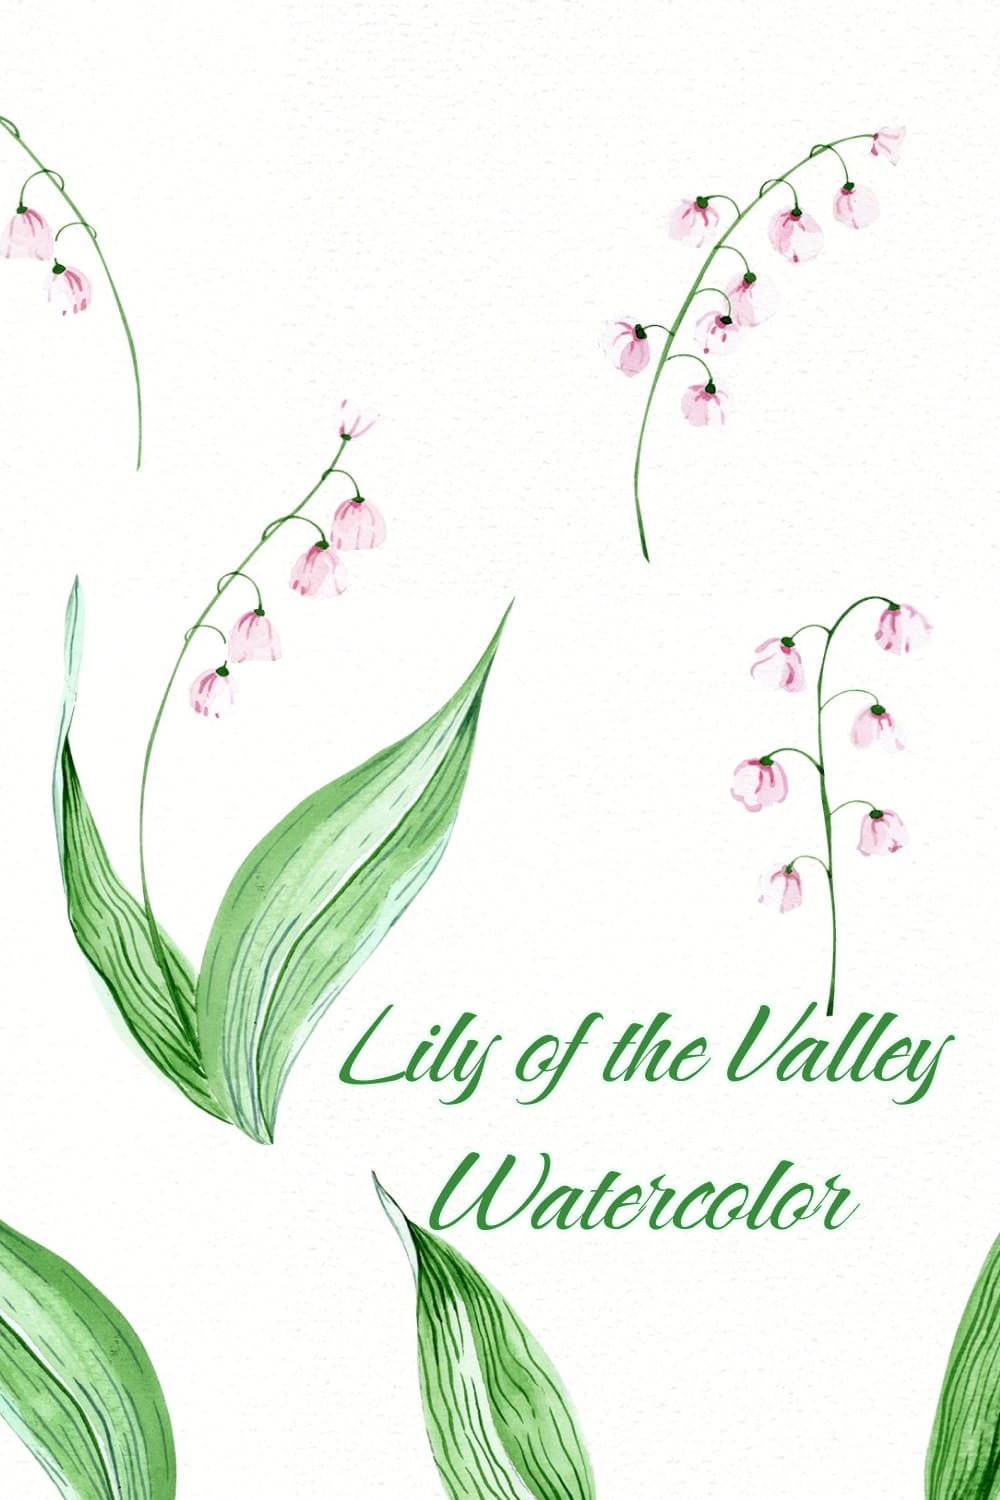 Meadow Lily Of The Valley Watercolor - preview image.